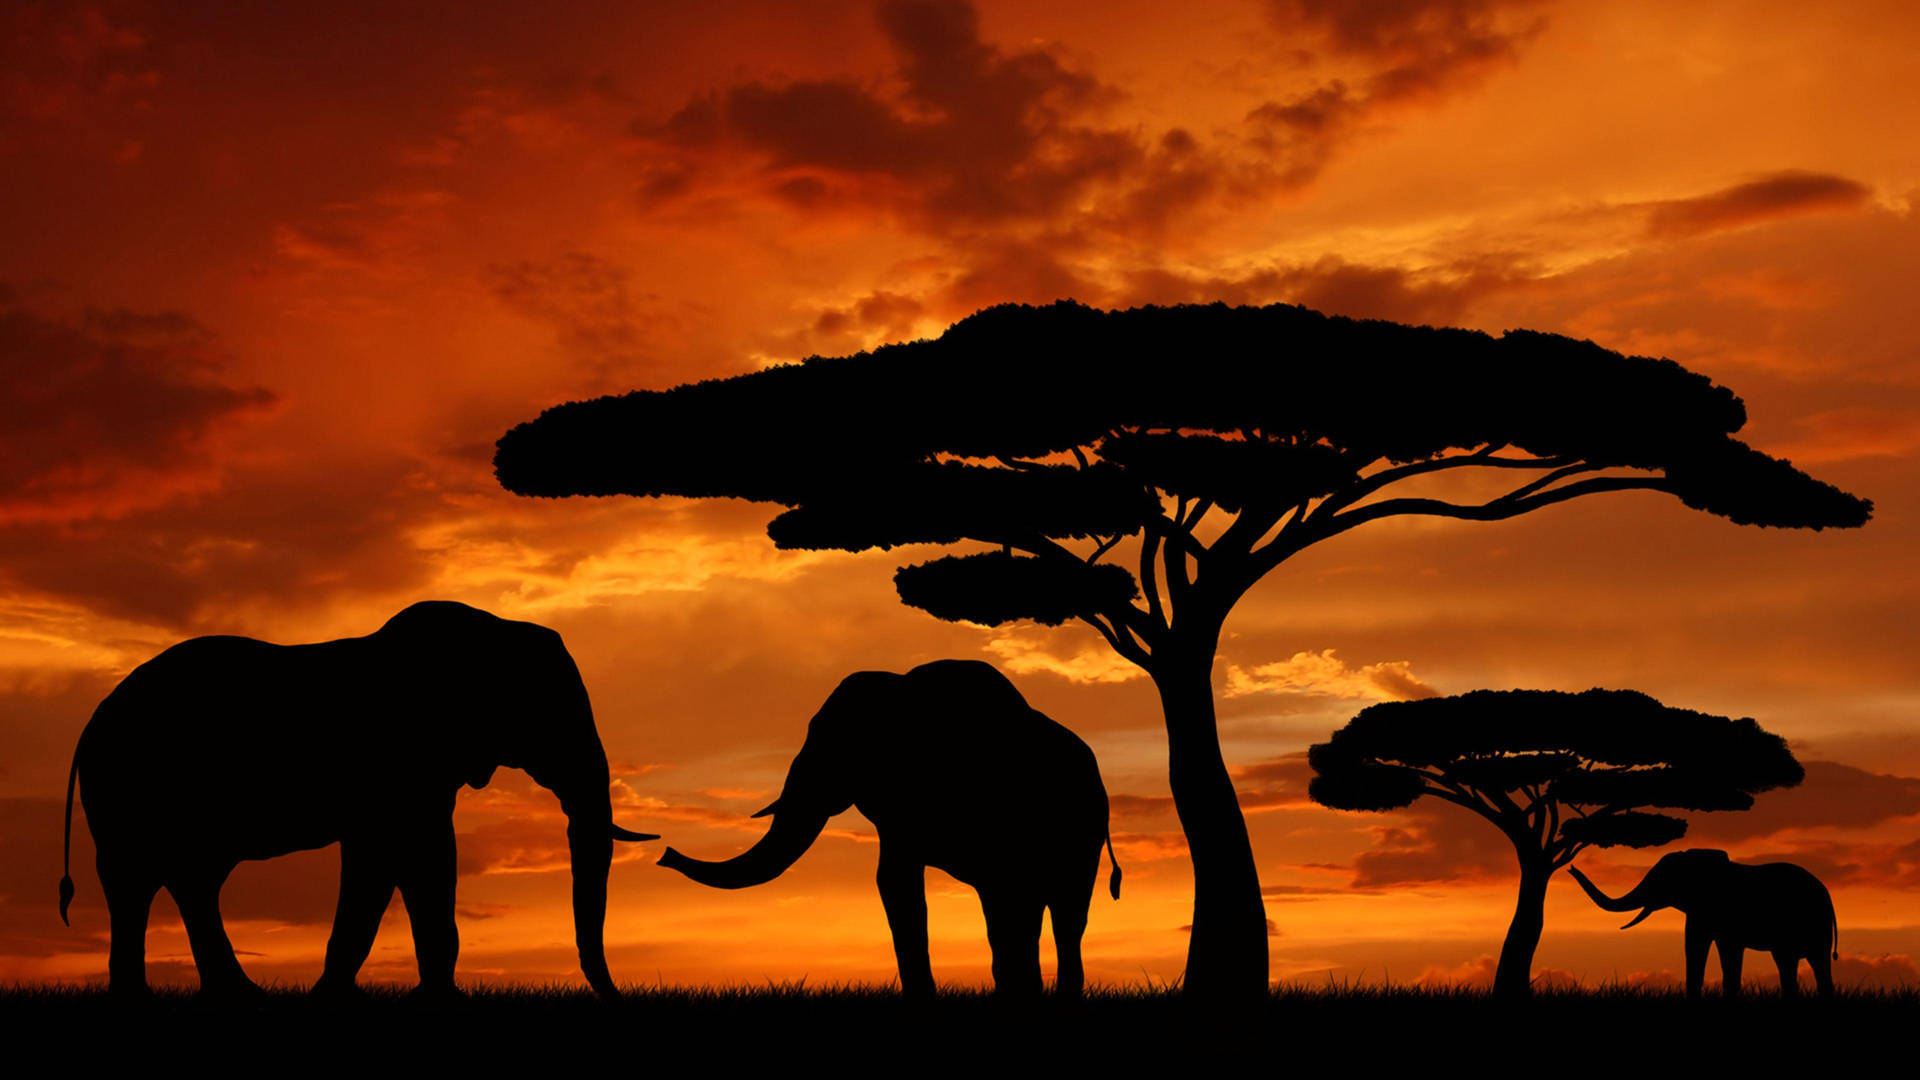 Elephants Silhouette In Africa Picture